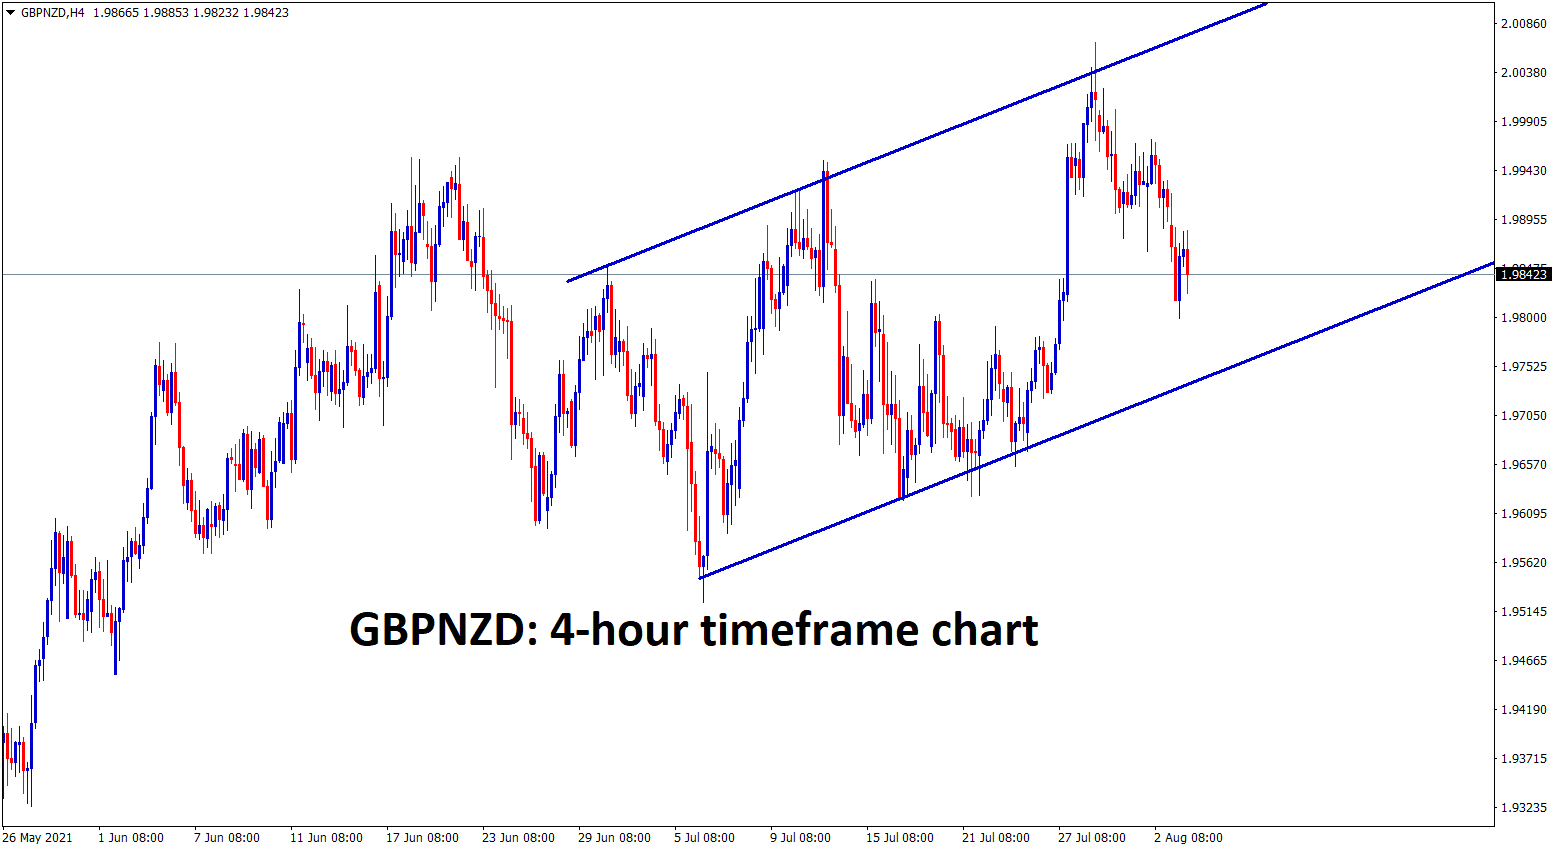 GBPNZD is moving between the ascending channel range